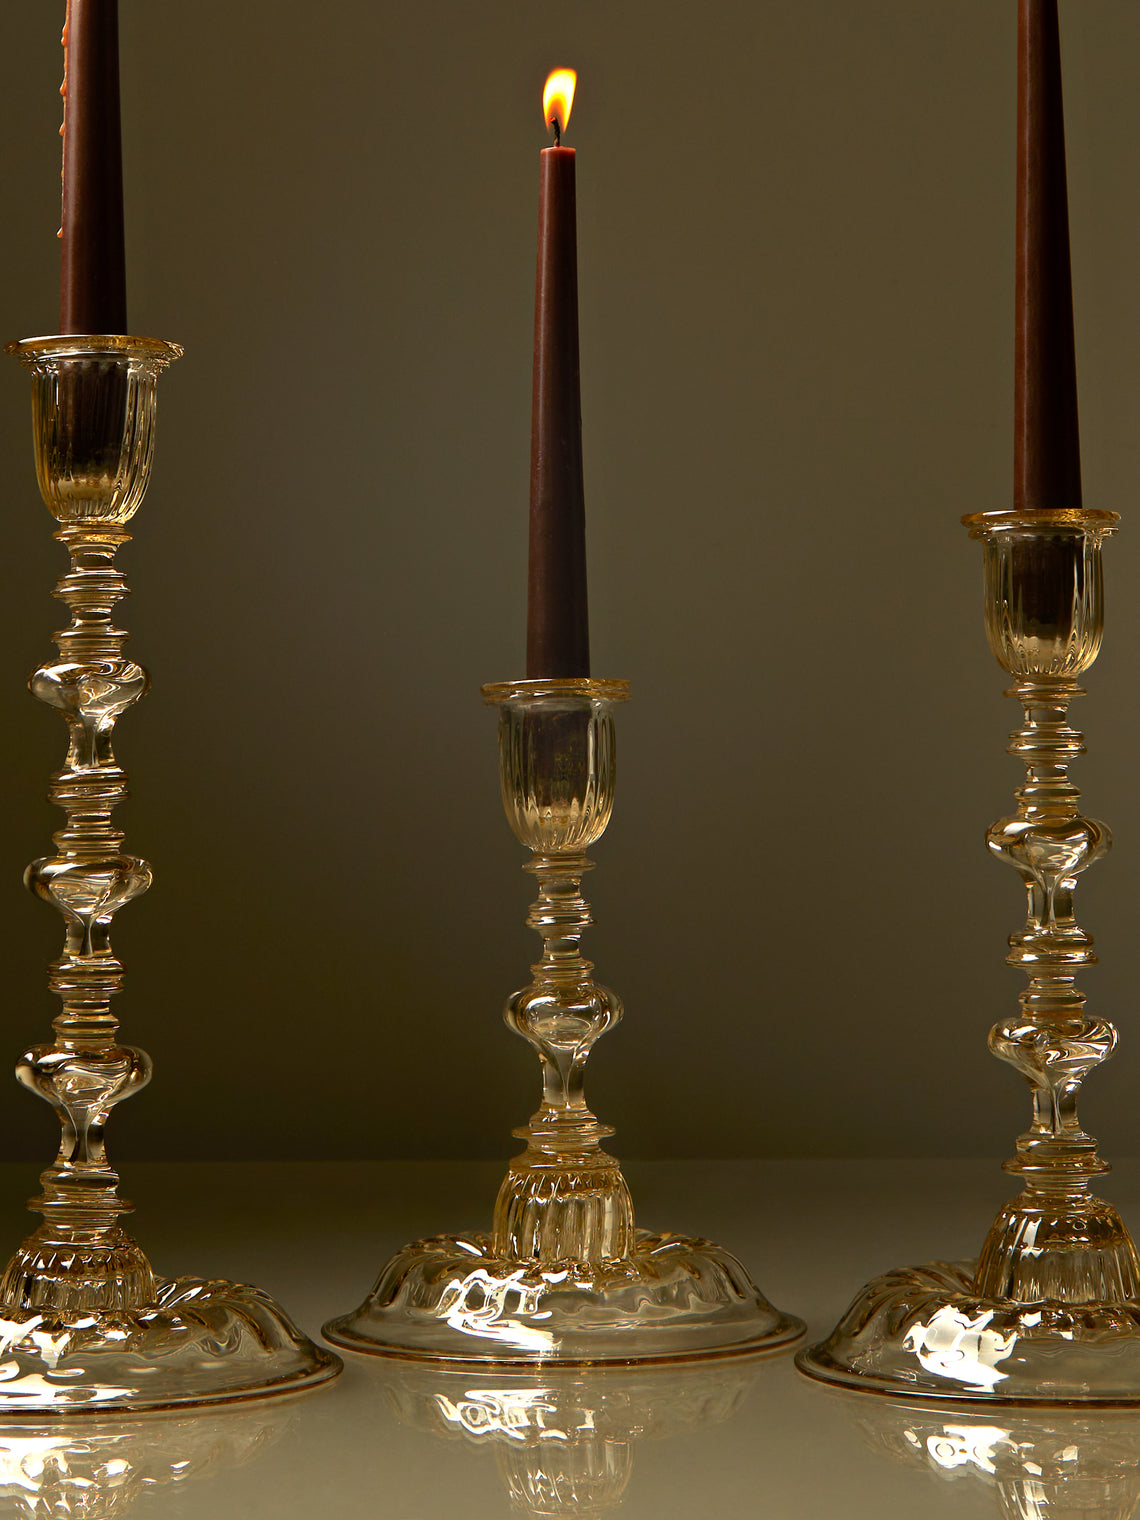 Bollenglass - Small Mouth-Blown Glass Candlestick -  - ABASK